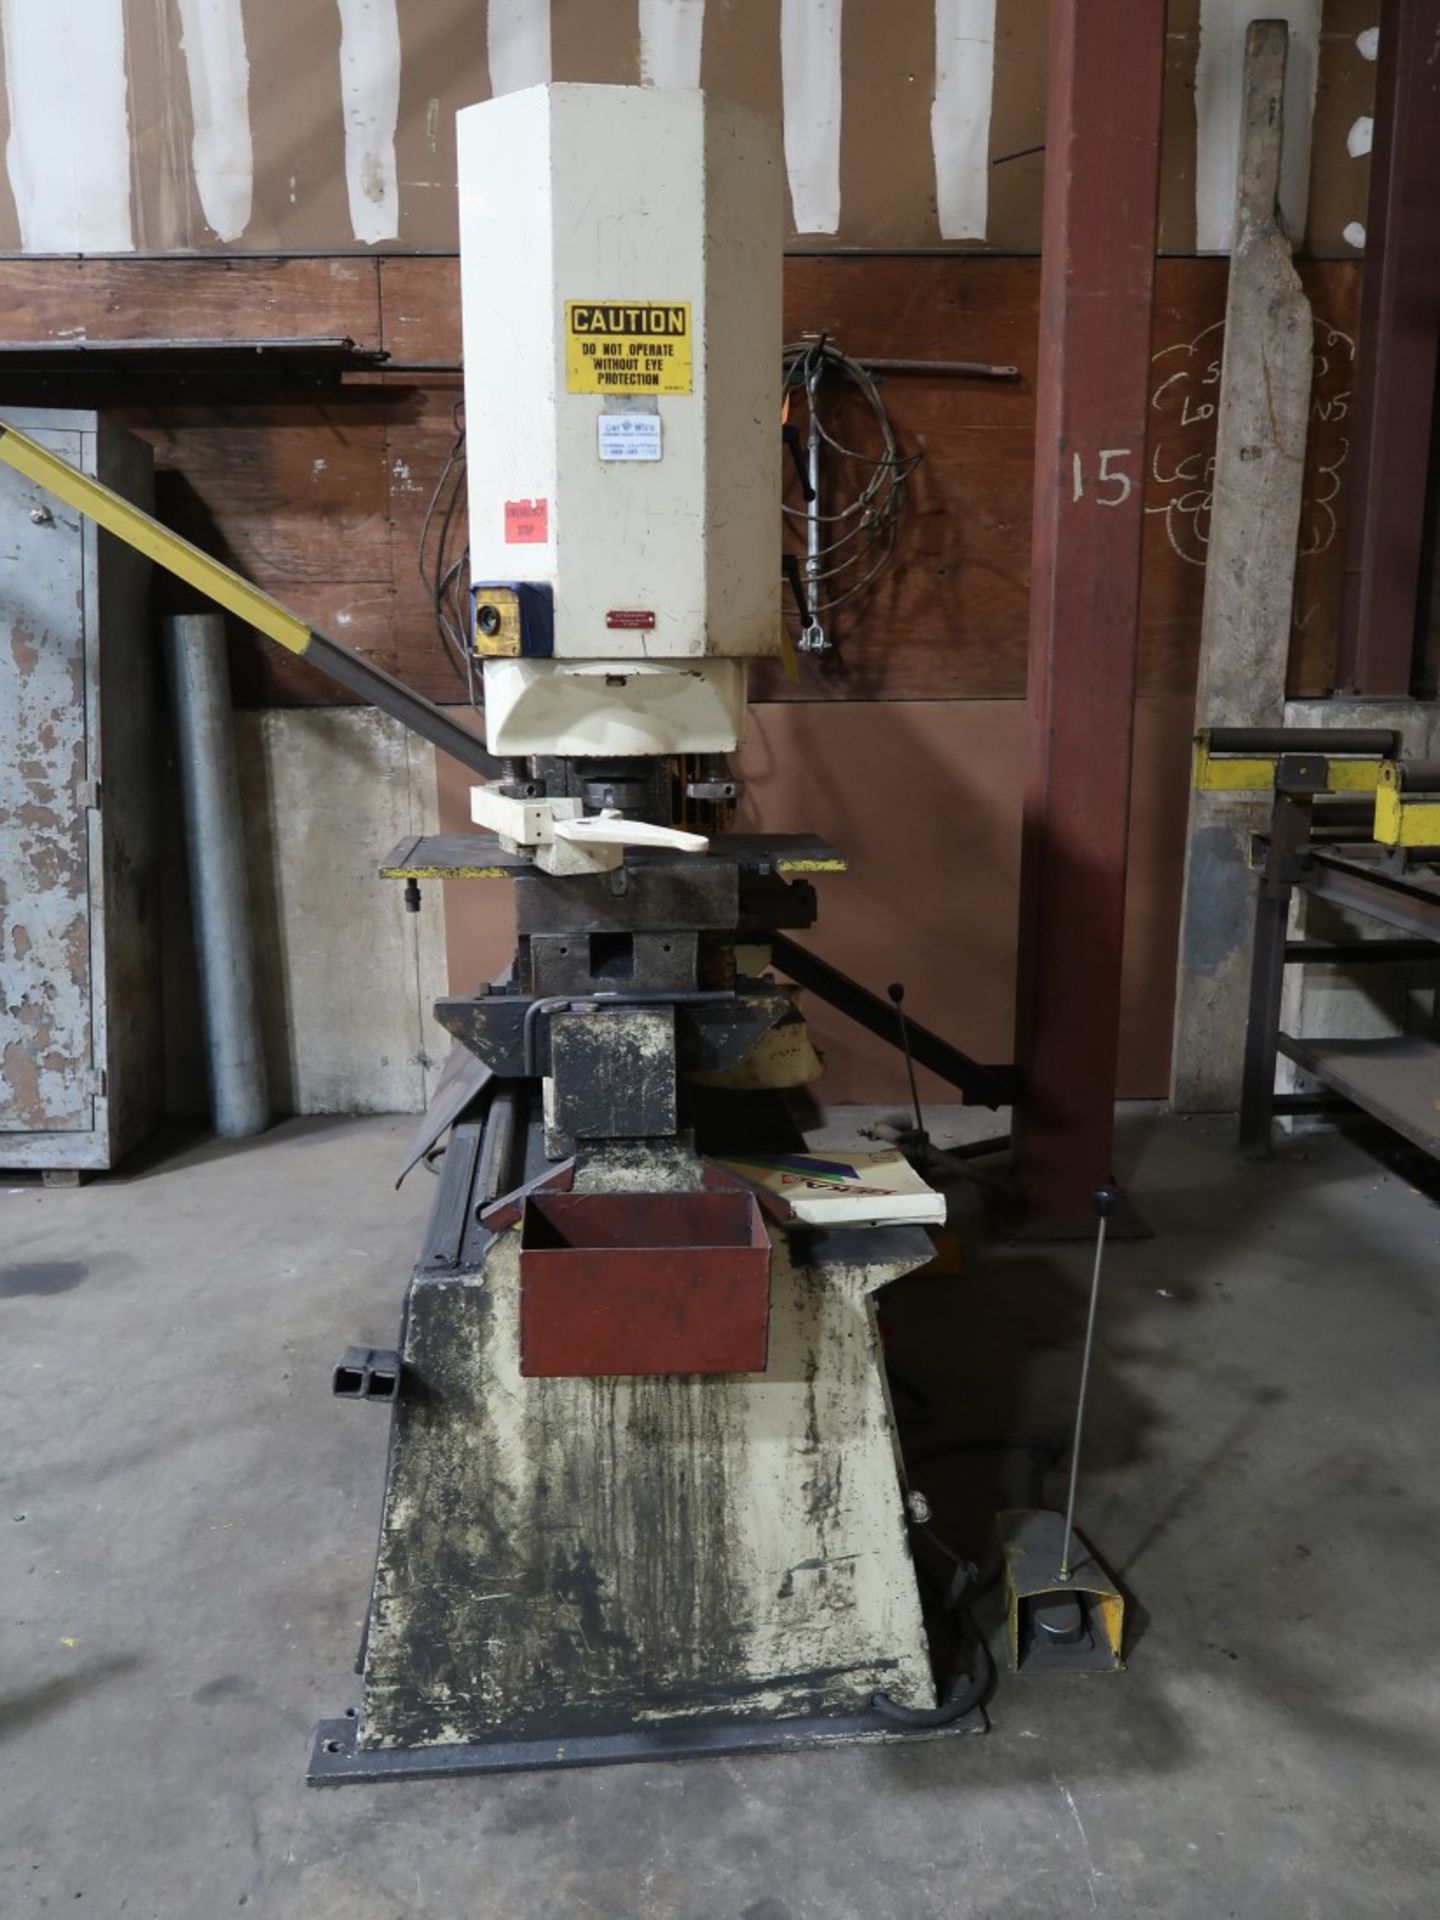 1995 Geka Hydracrop 110A Ironworker, S/N 15798, Punch Head Replaced in 2020; Punching Tonnage 120 - Image 3 of 6